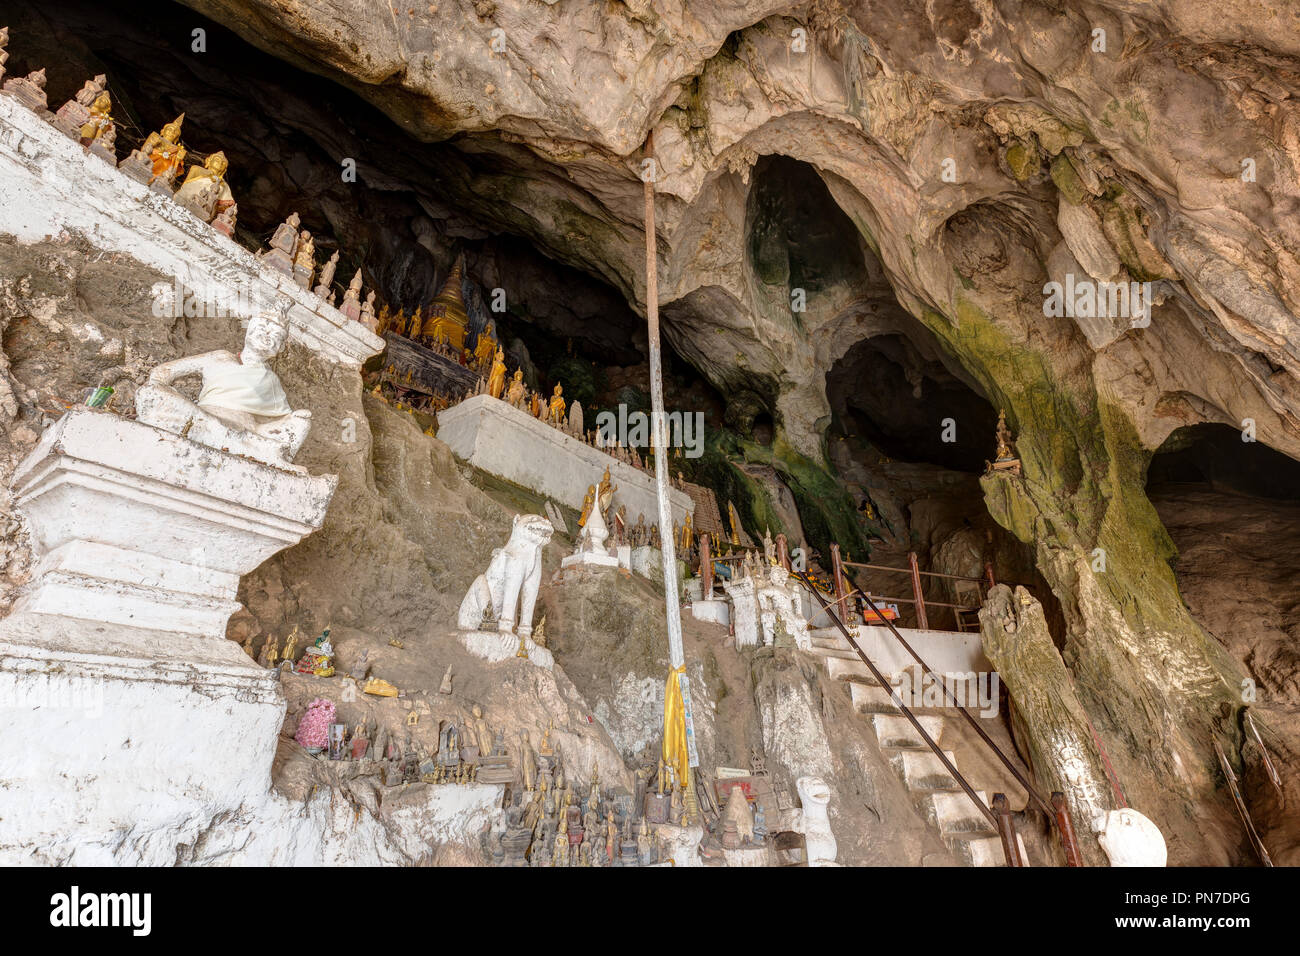 Hundreds of old and faded Buddha statues inside the Tham Ting Cave at the famous Pak Ou Caves near Luang Prabang in Laos. Stock Photo